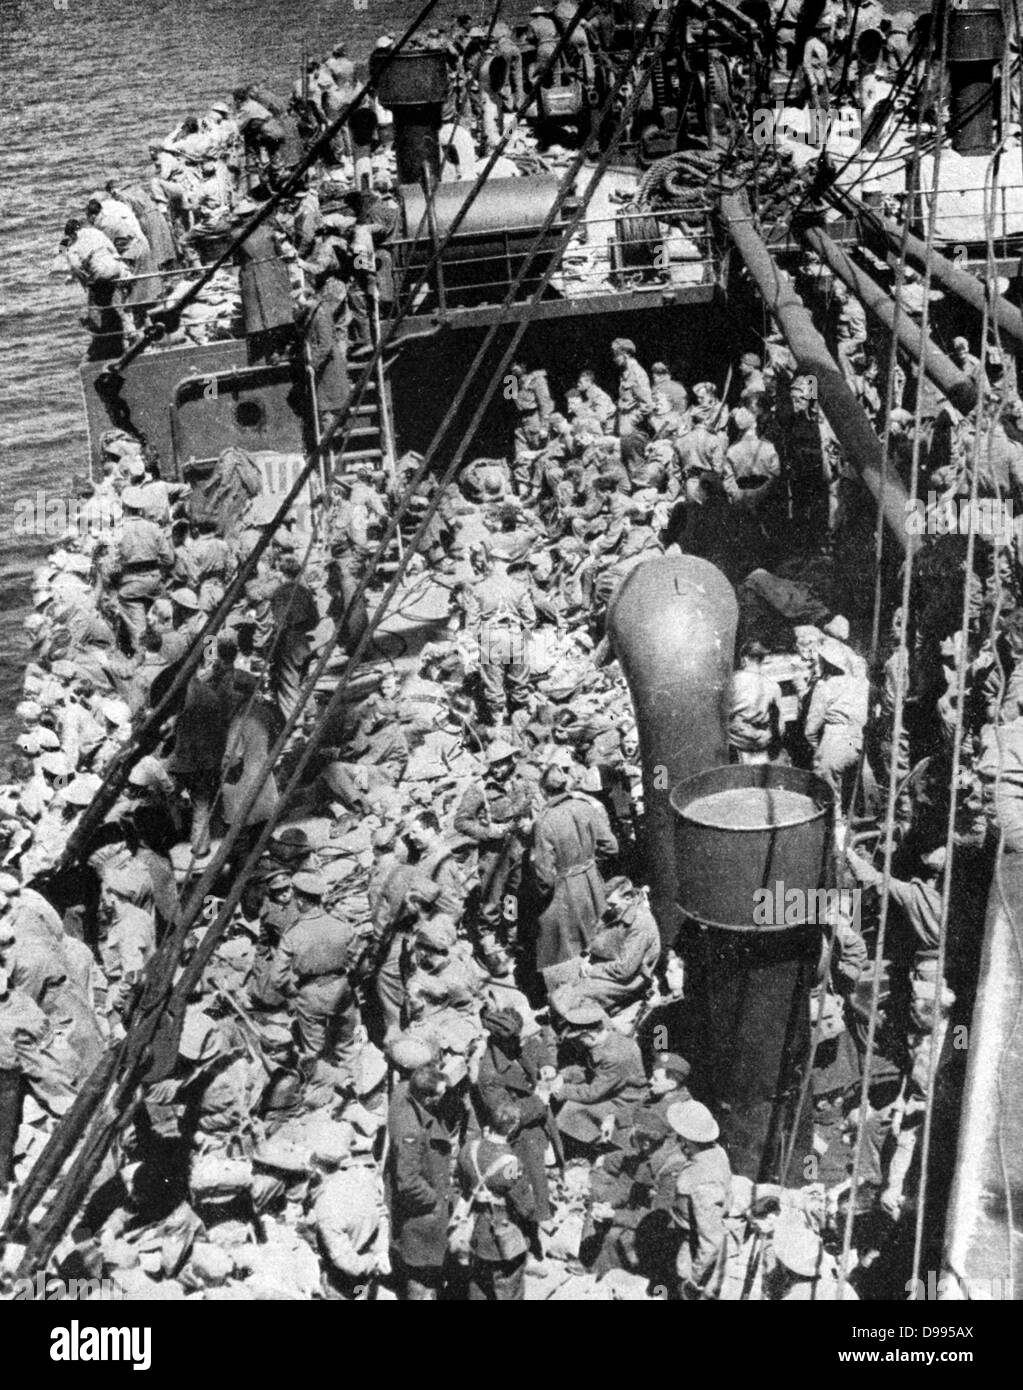 Following Battle of France and fall of Paris in May 1940, members of the British Expeditionary Force left in France after evacuation of Dunkirk made their way to Channel ports not yet in German hands to find transport to England. Stock Photo